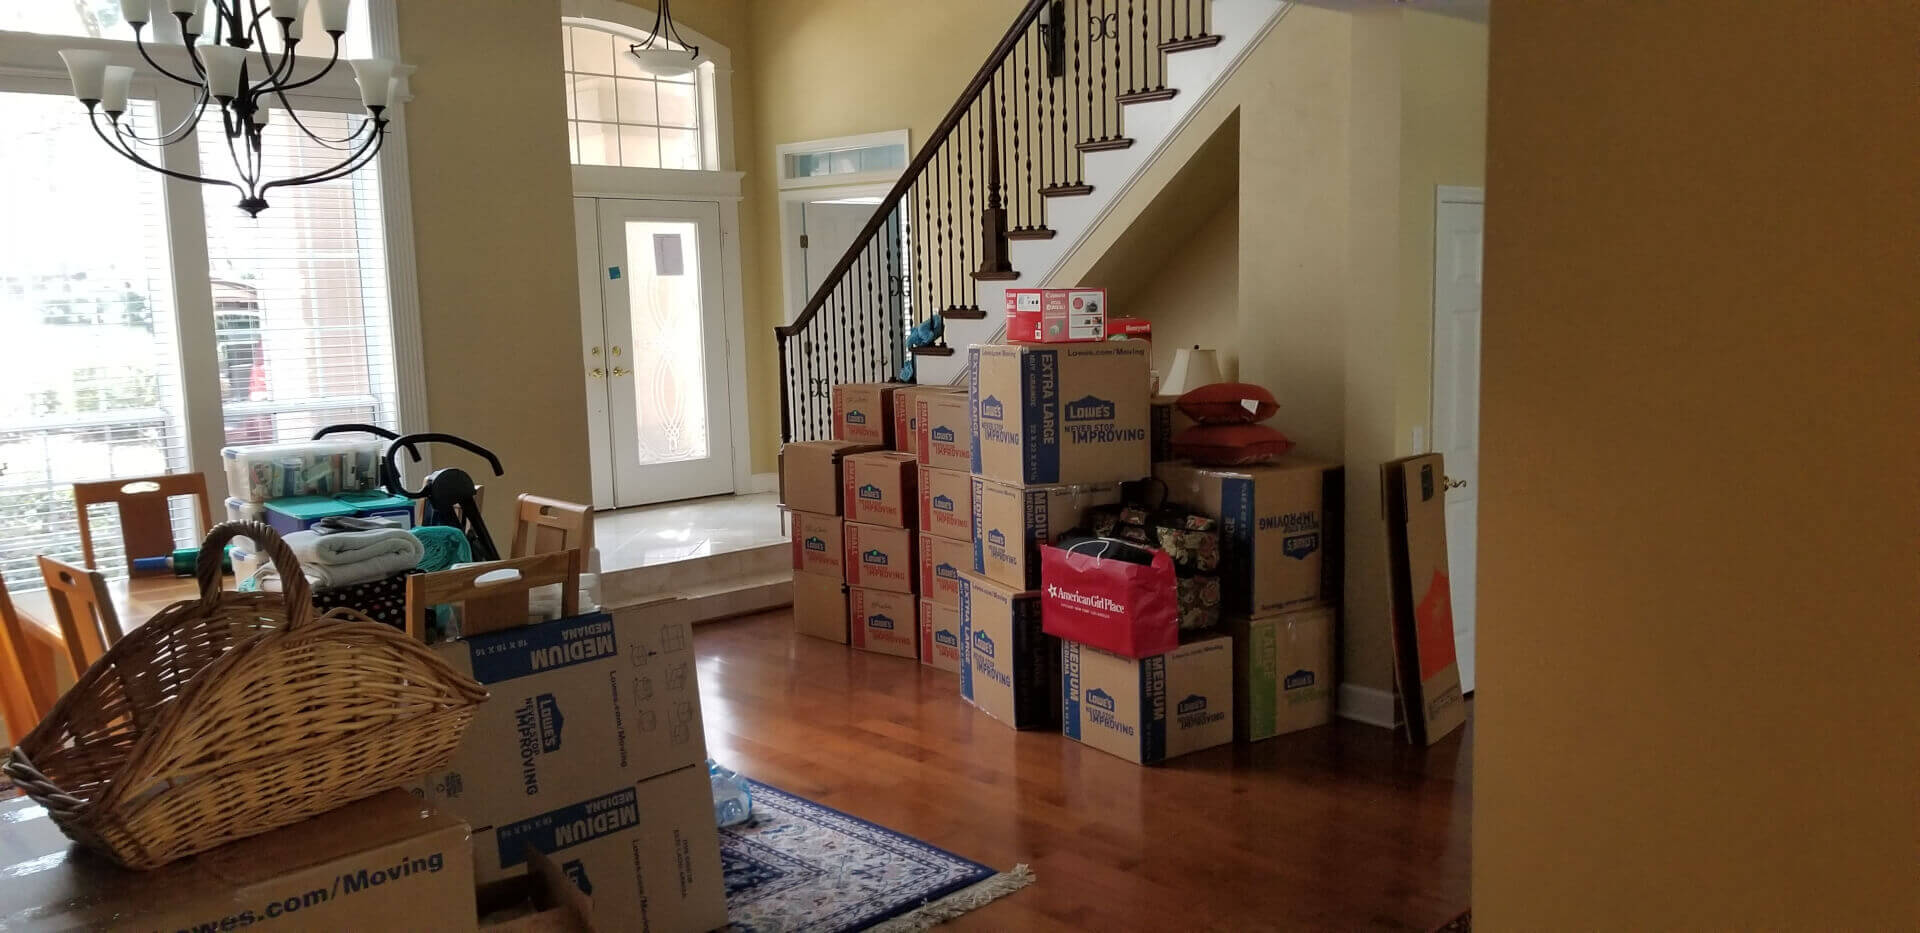 An image of packed boxes in a house ready for move.